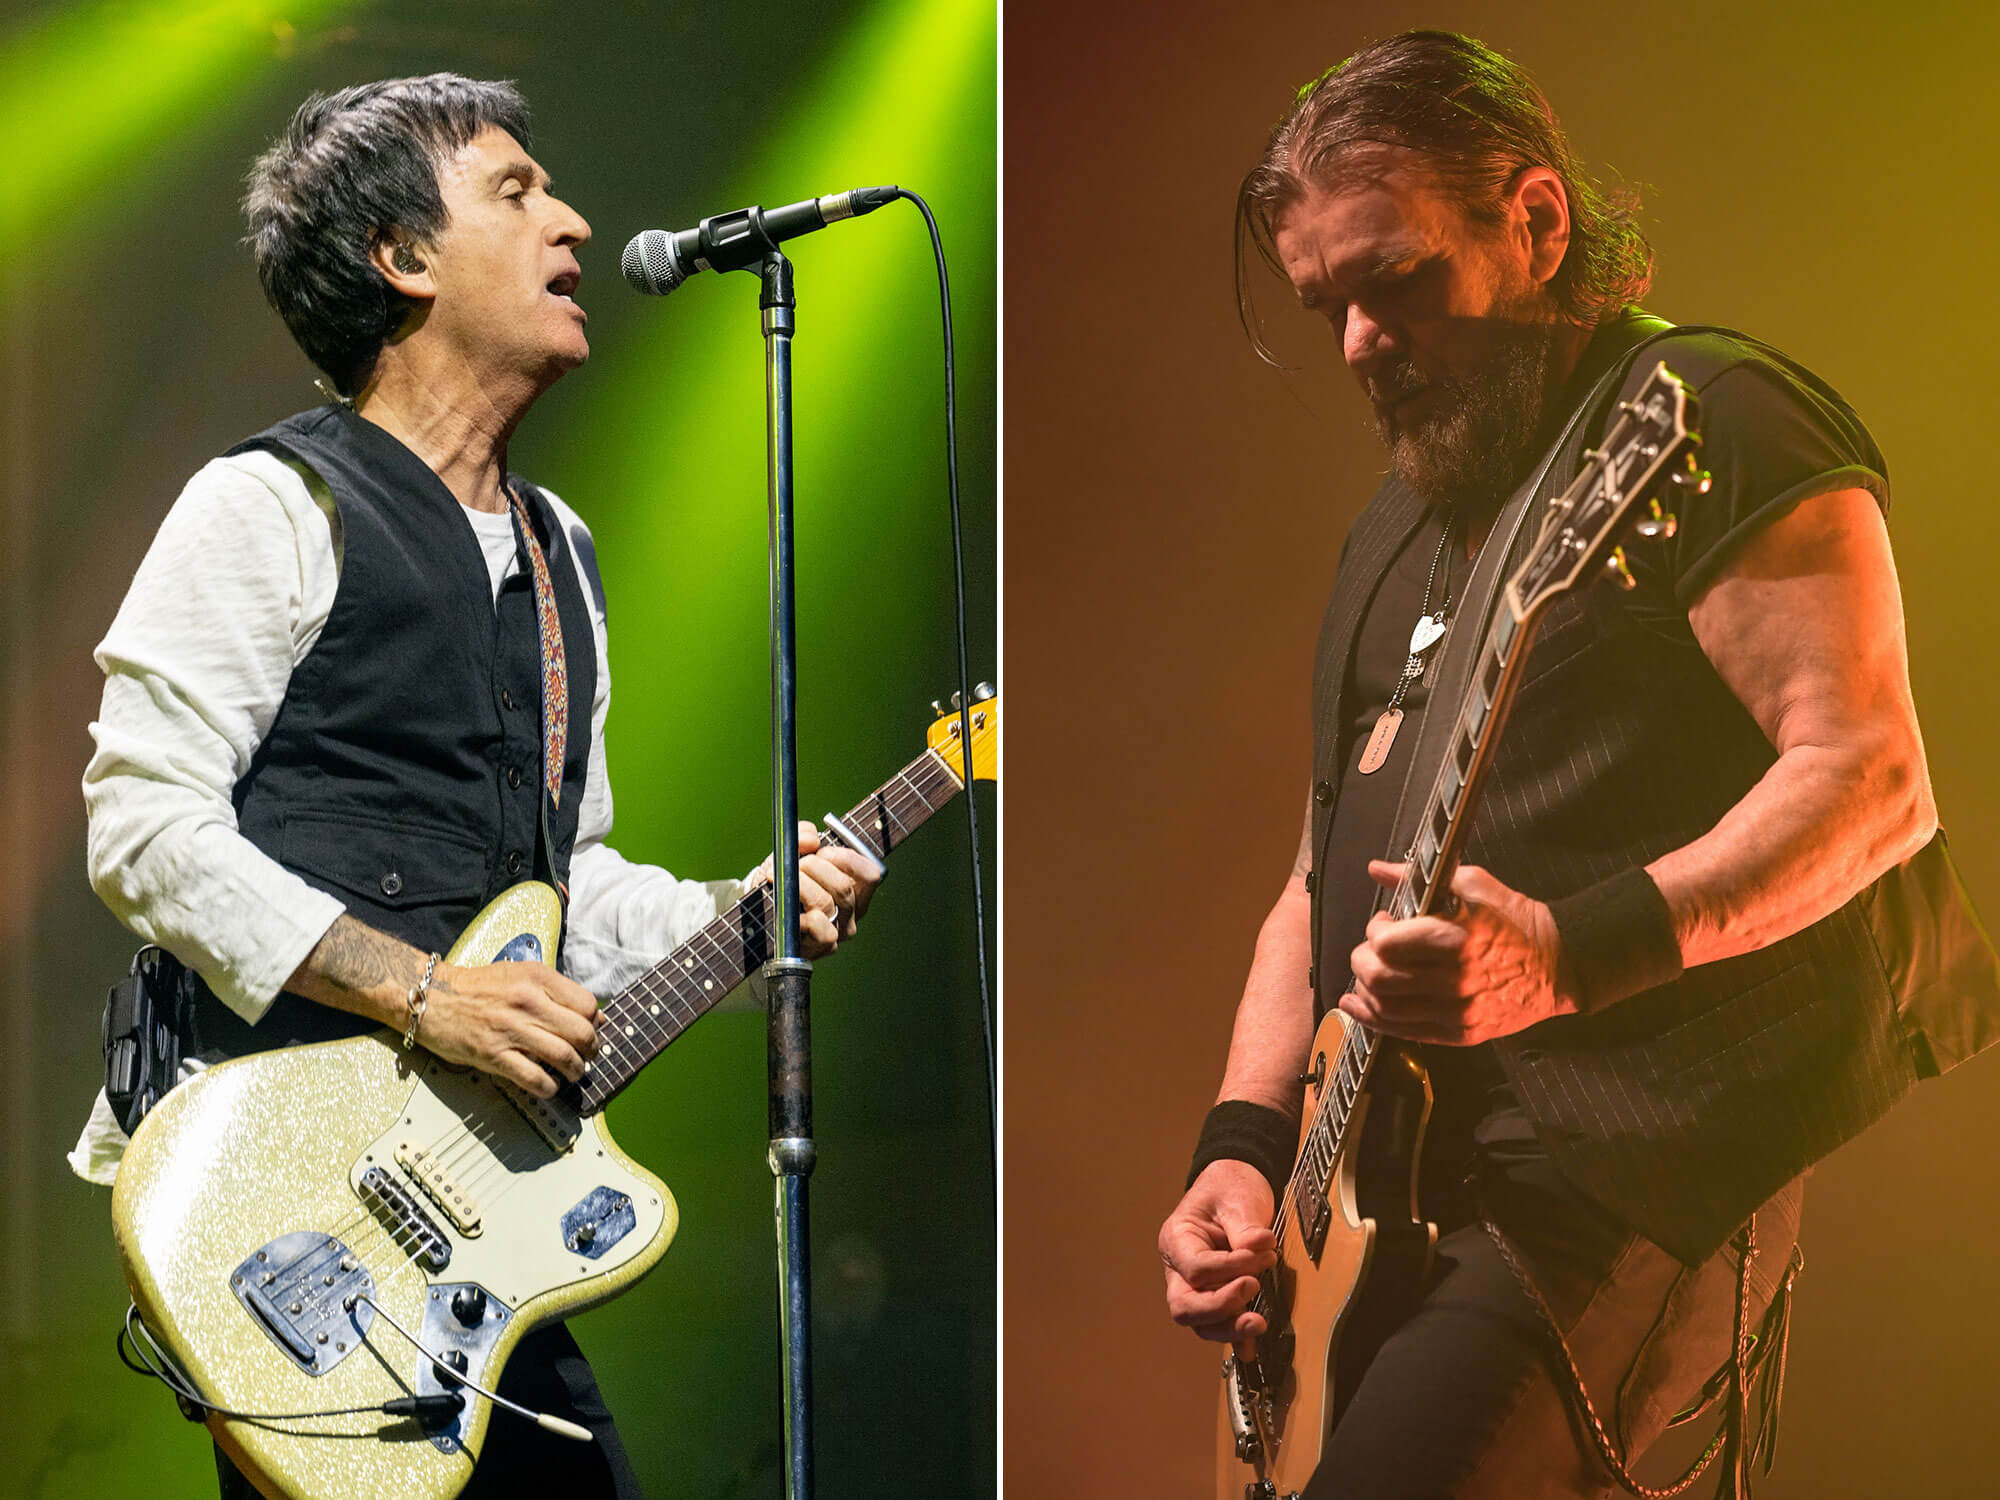 [L-R] Johnny Marr and Billy Duffy performing live